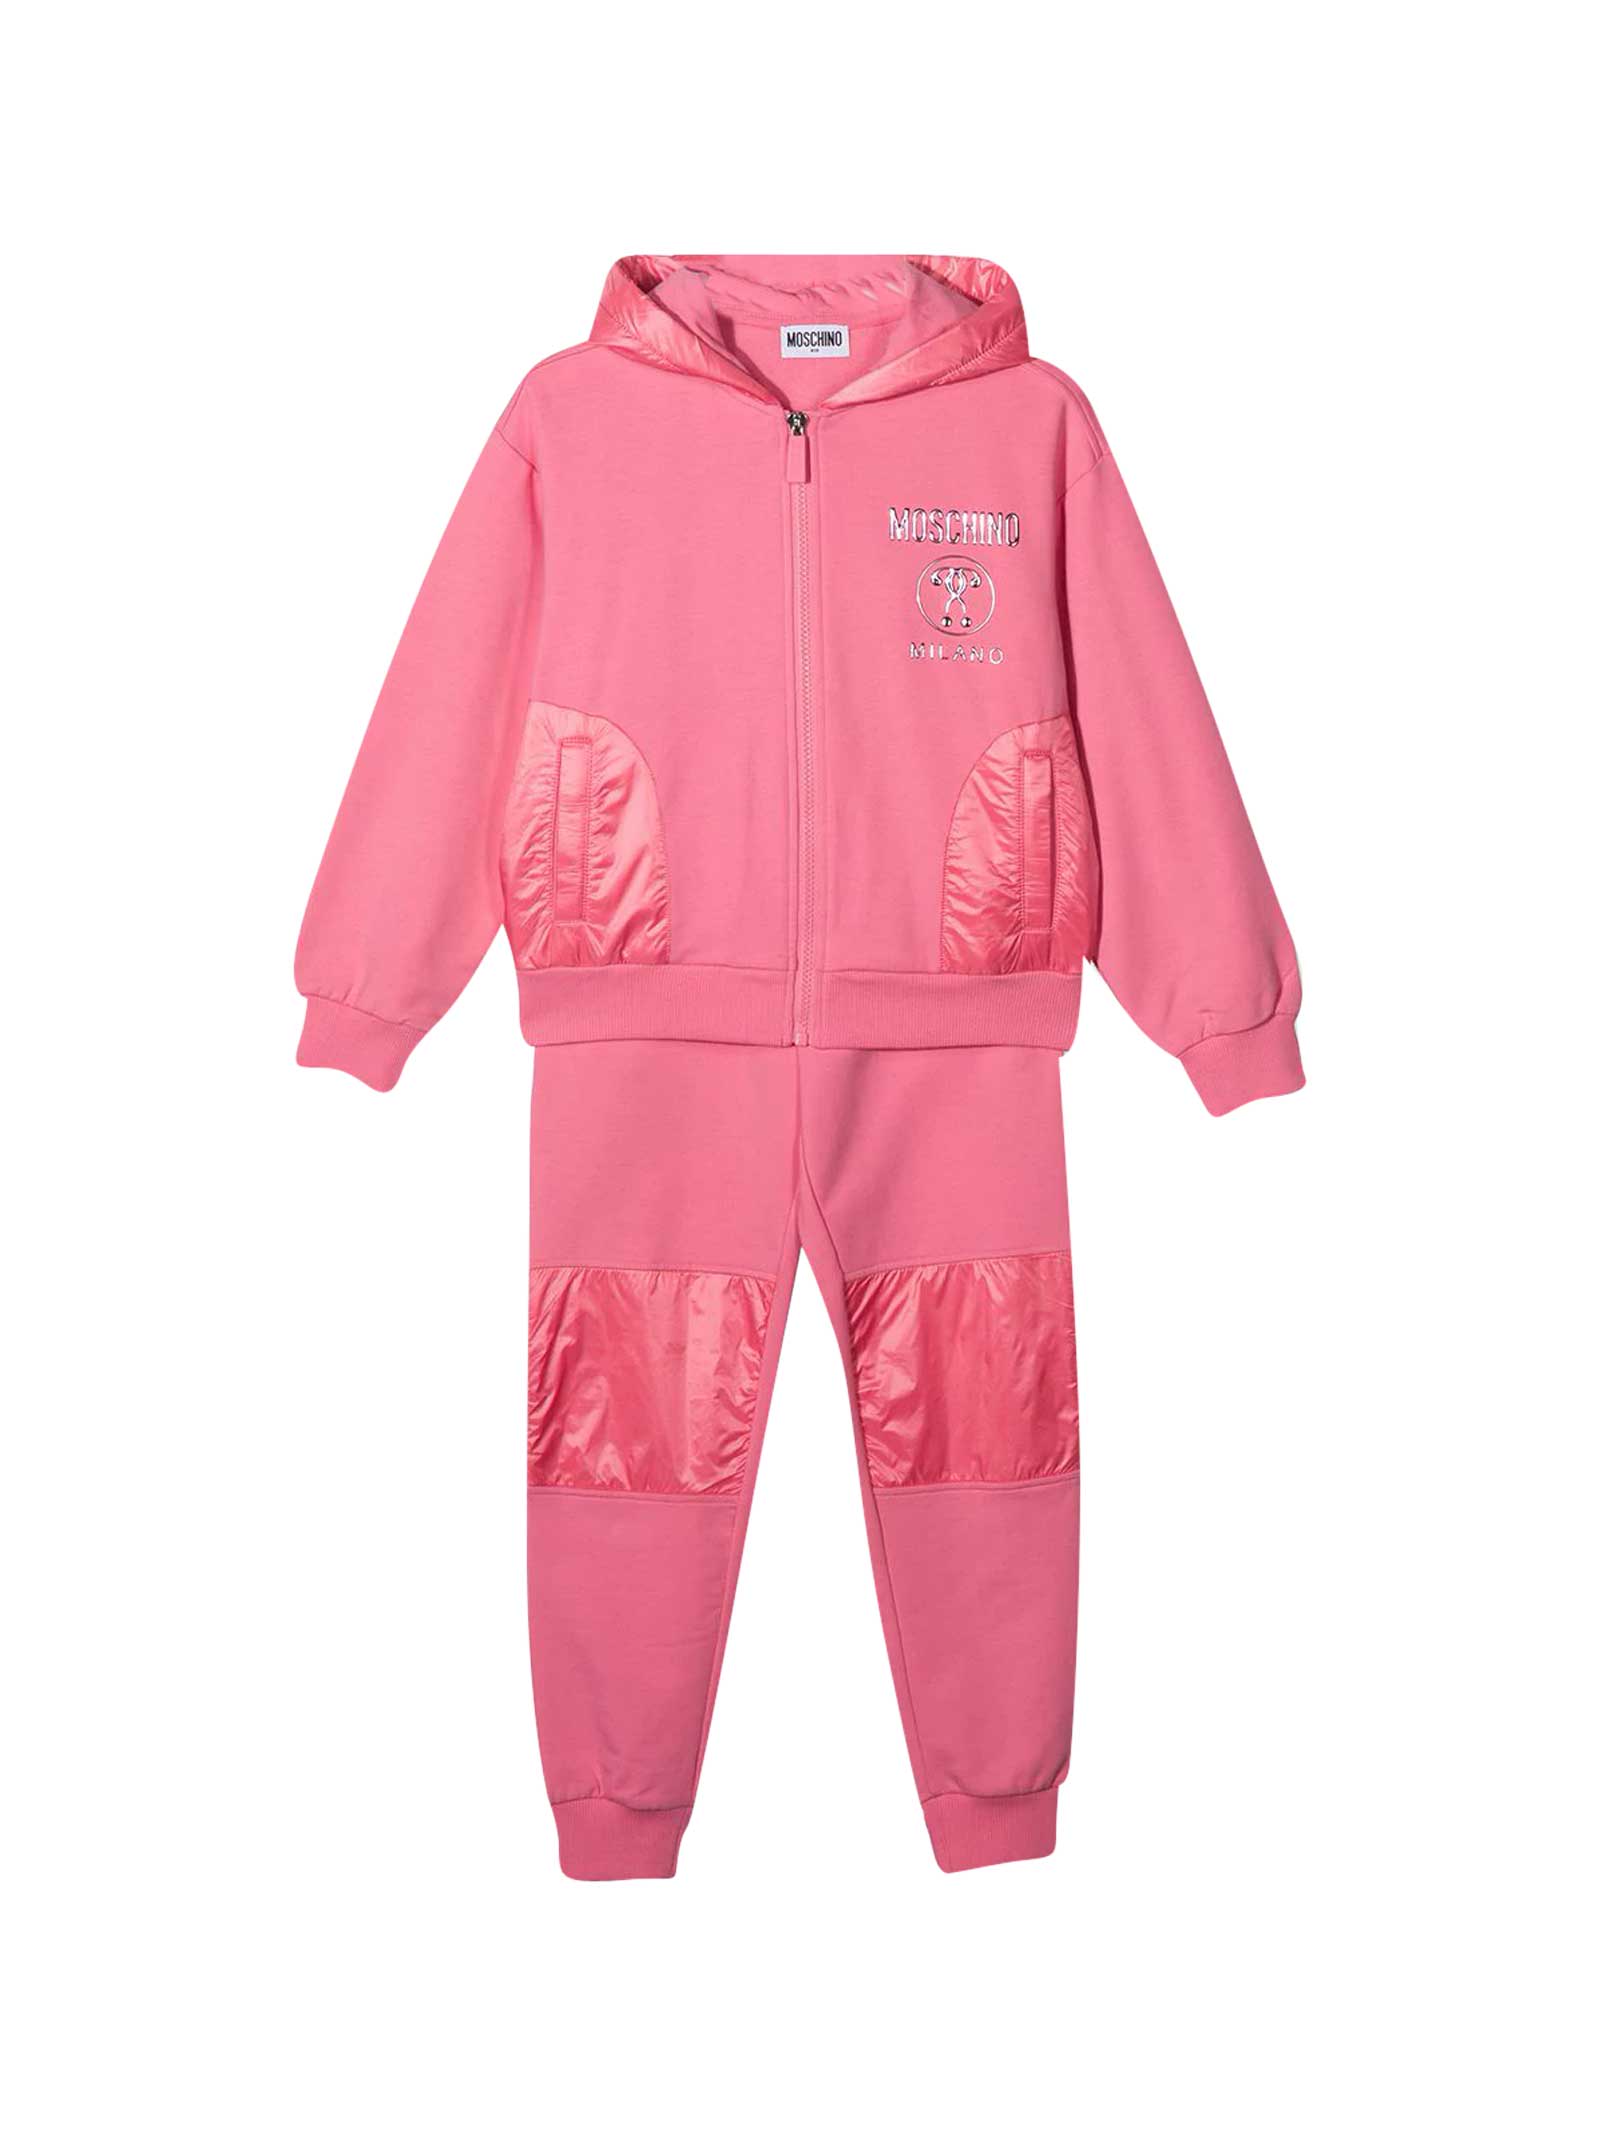 Moschino 2-piece Sports Suit